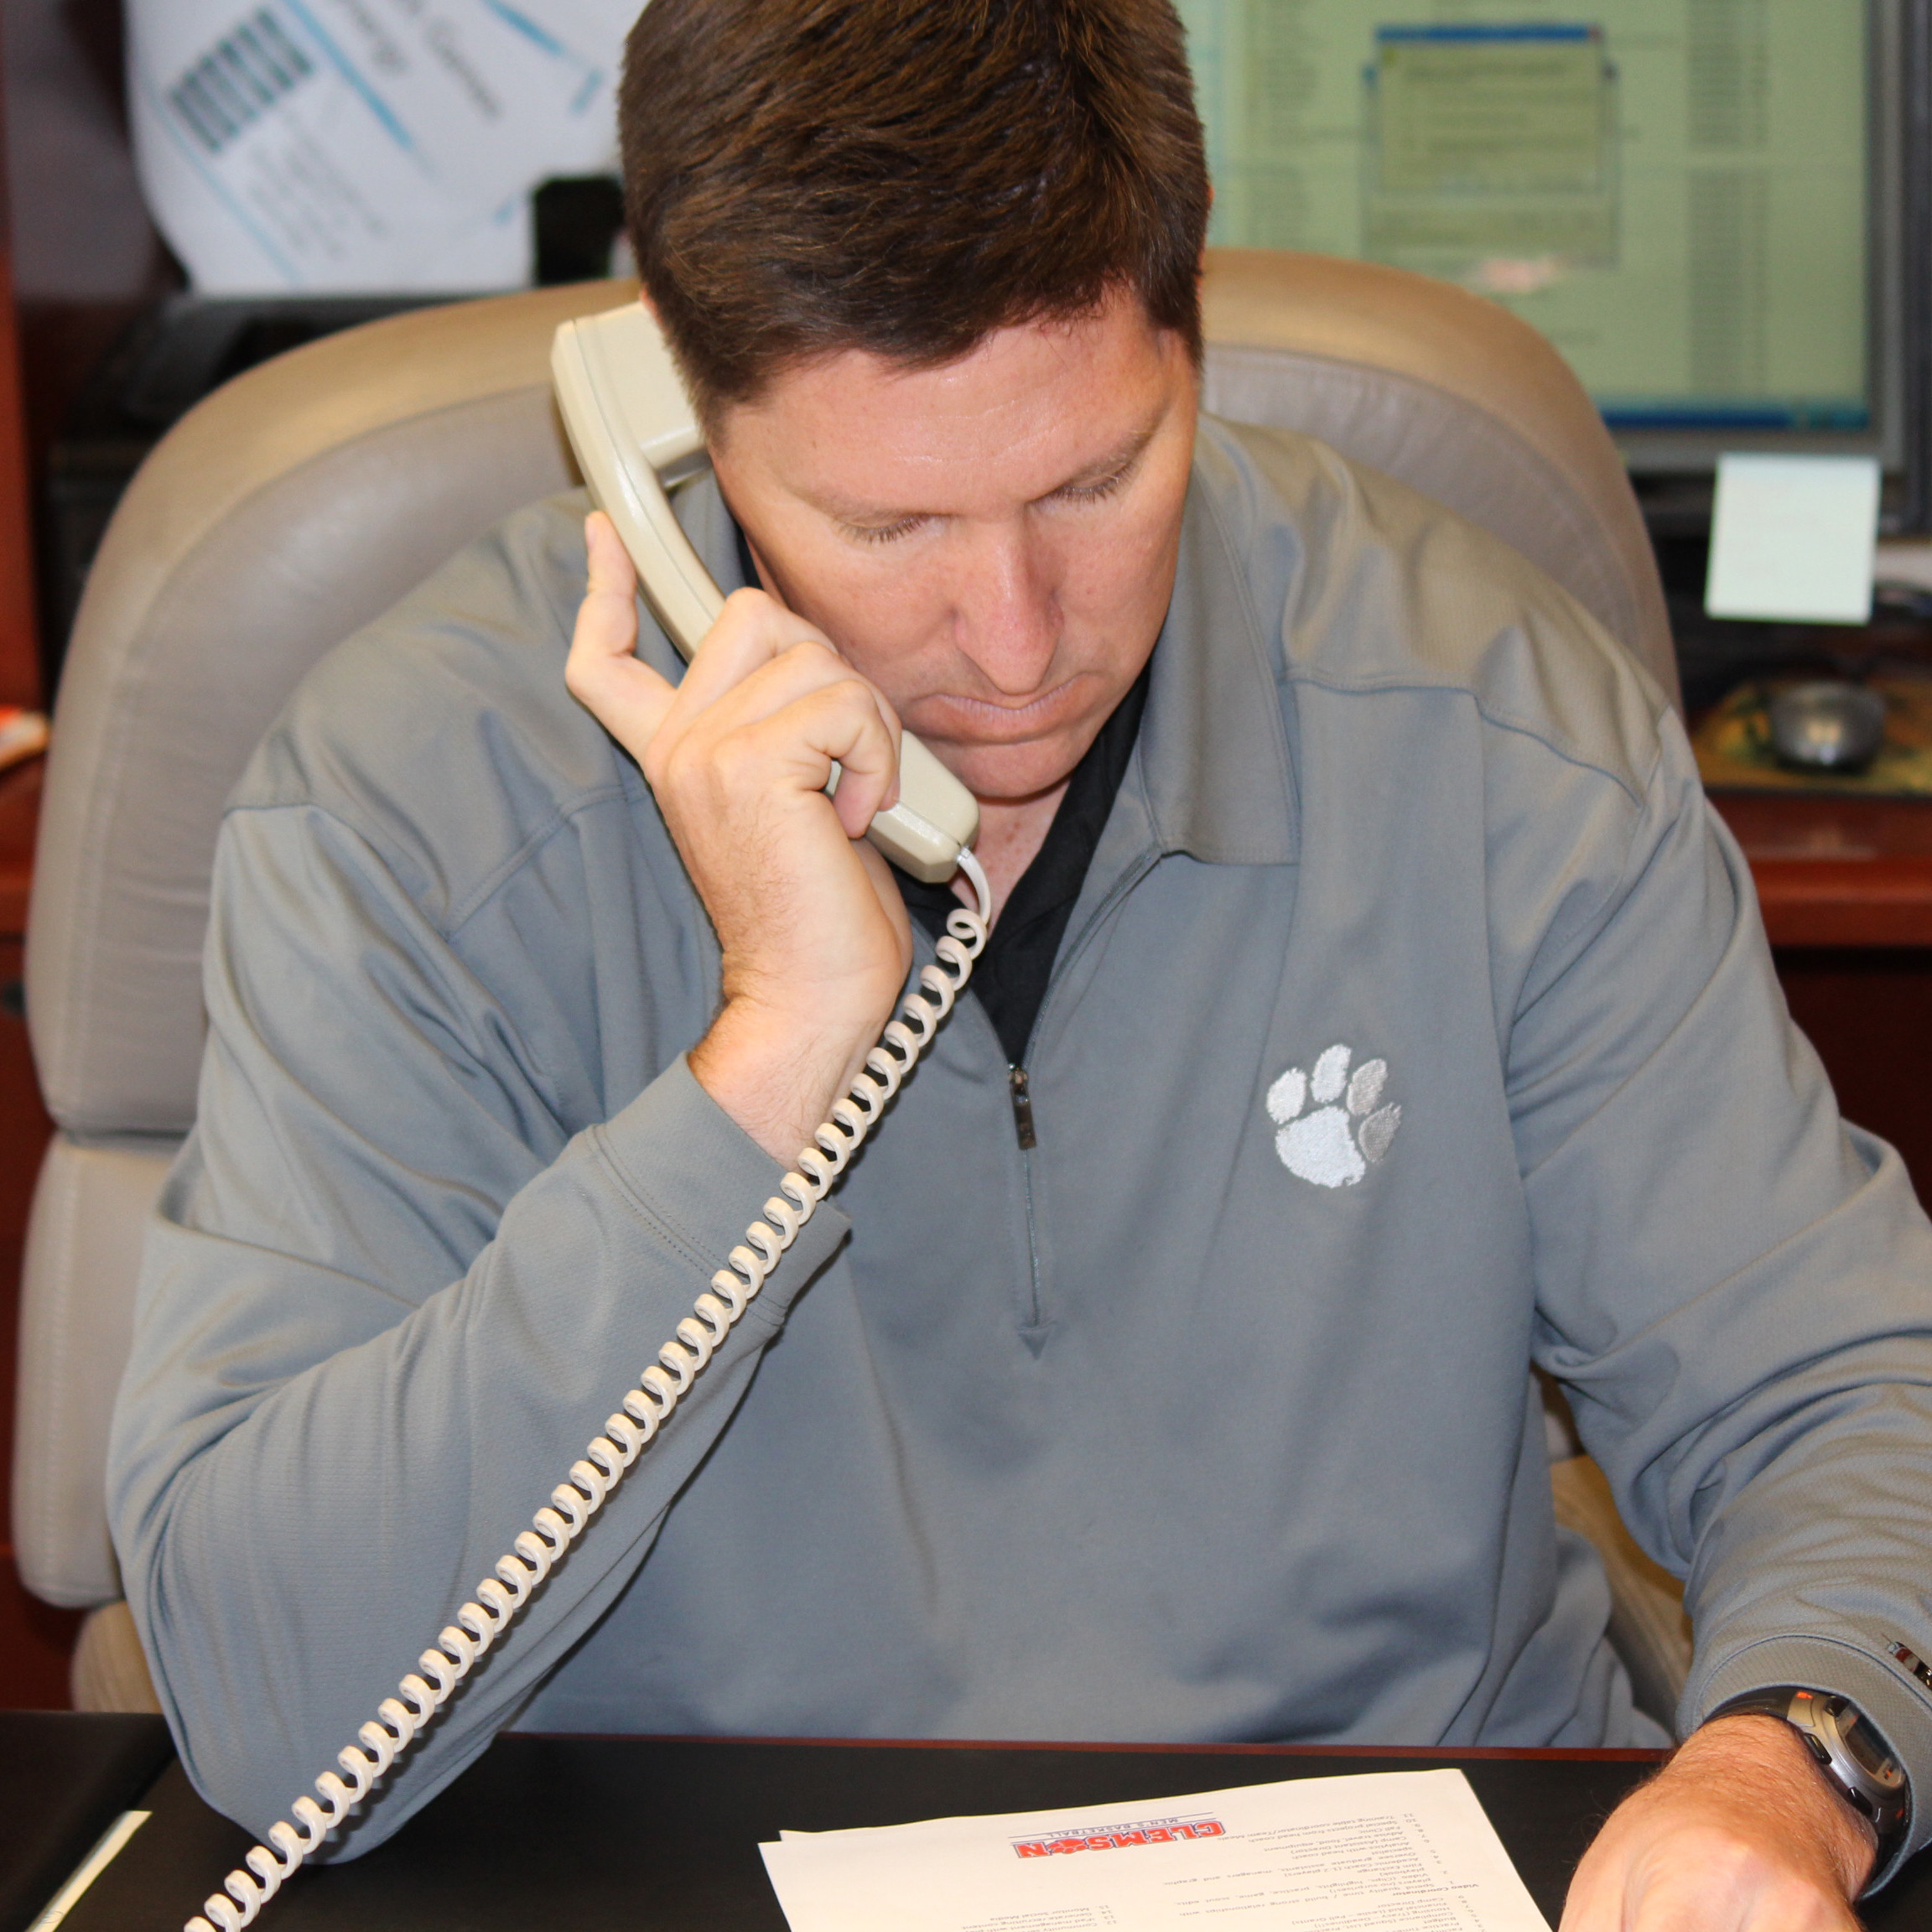 Brownell Works Phones With Ticket Deadline Approaching